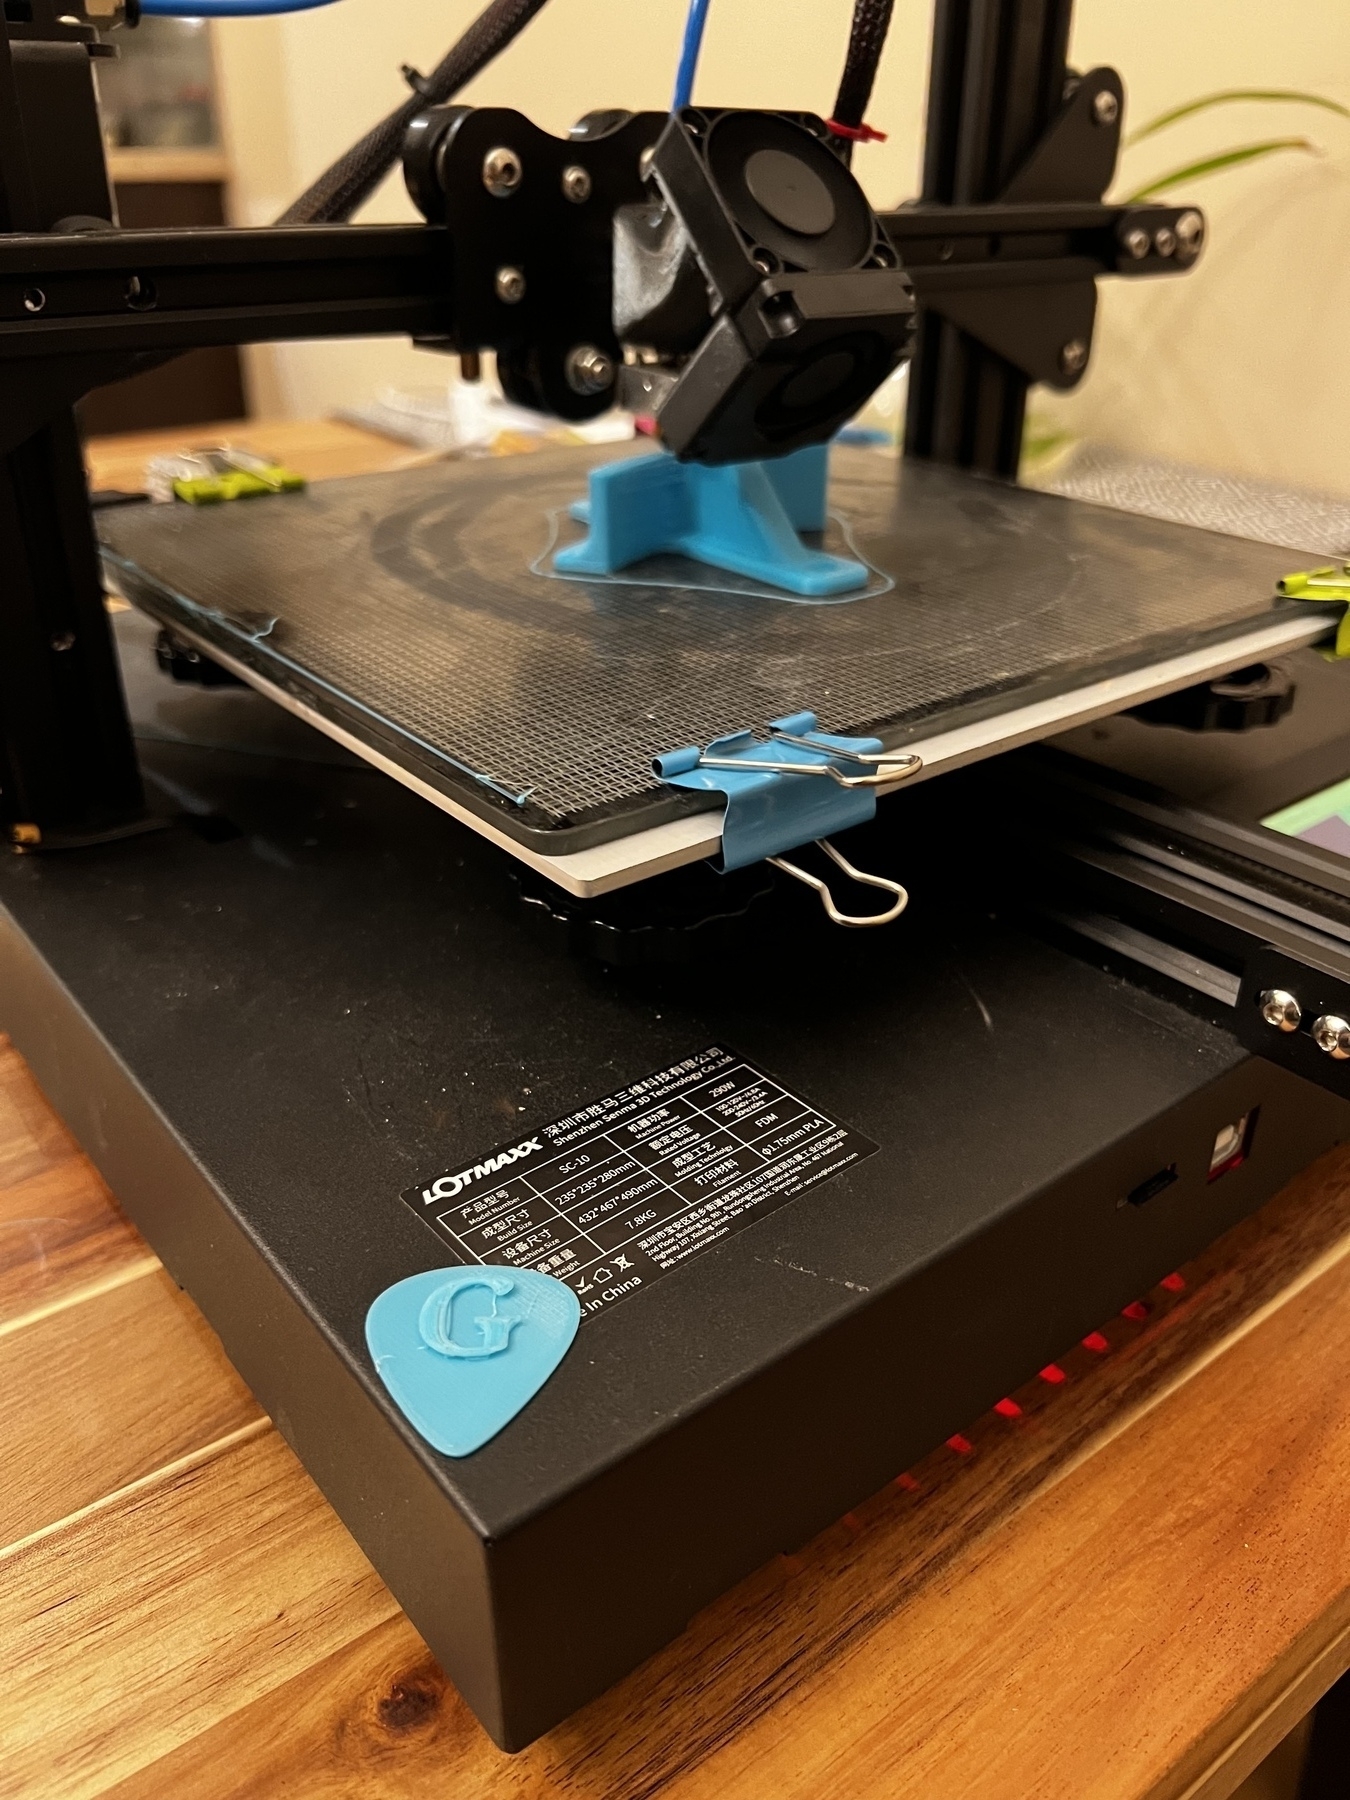 A 3D printer with a printed guitar pic on the side of it while a headphone holder is being printed. 